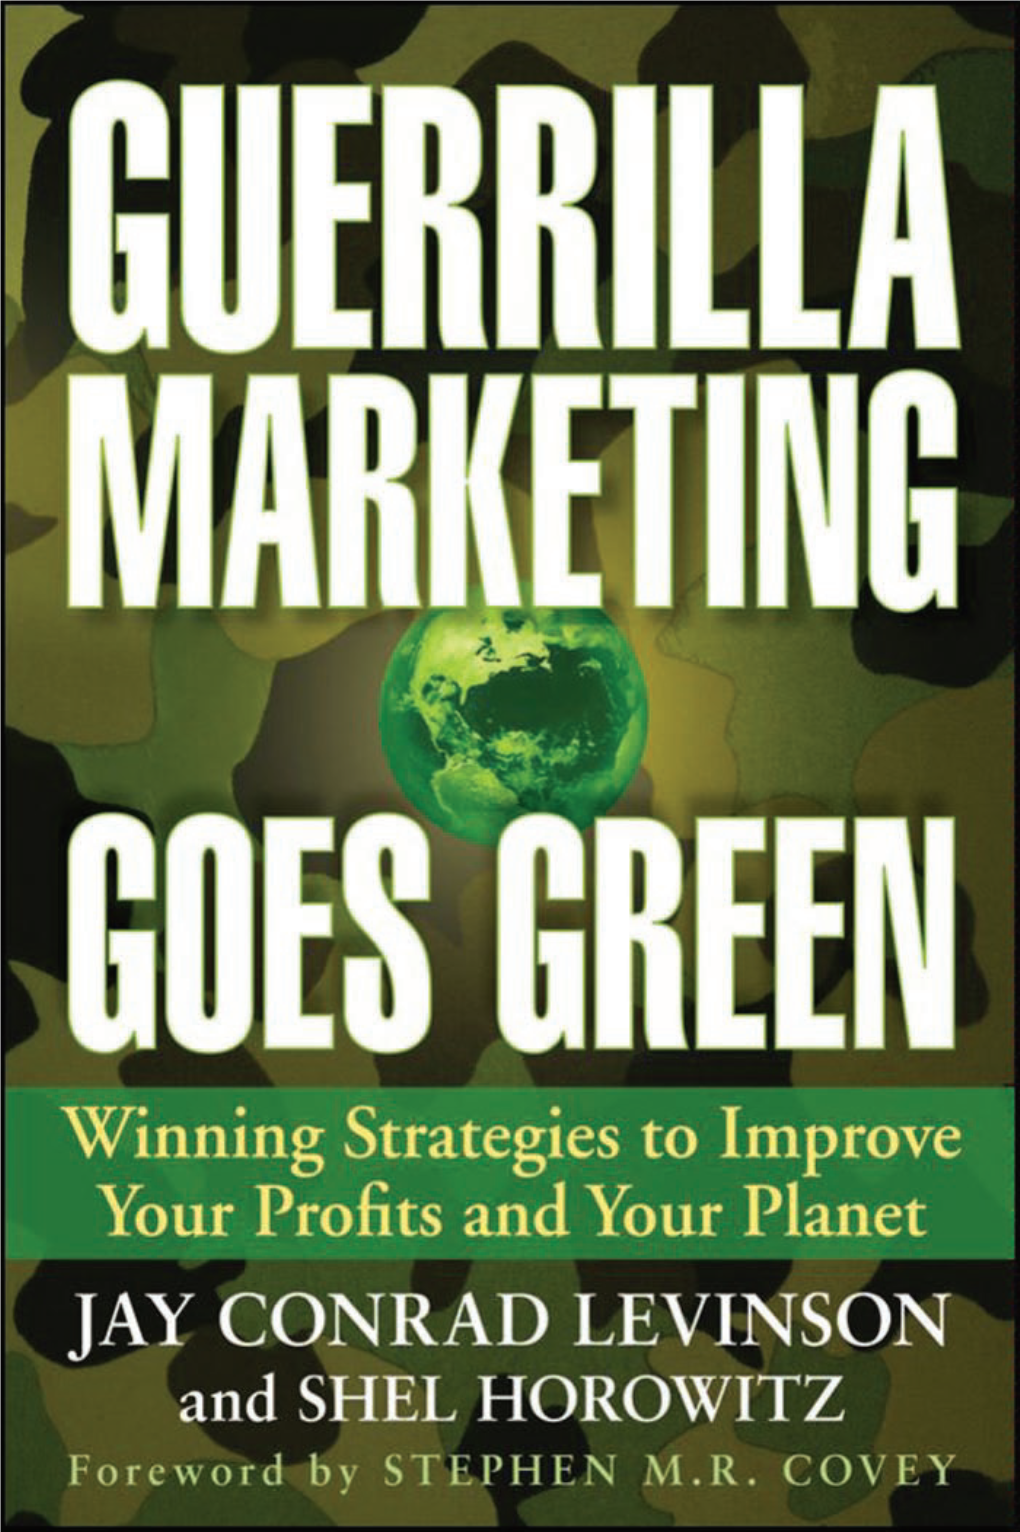 Guerrilla Marketing Goes Green: Winning Strategies to Improve Your